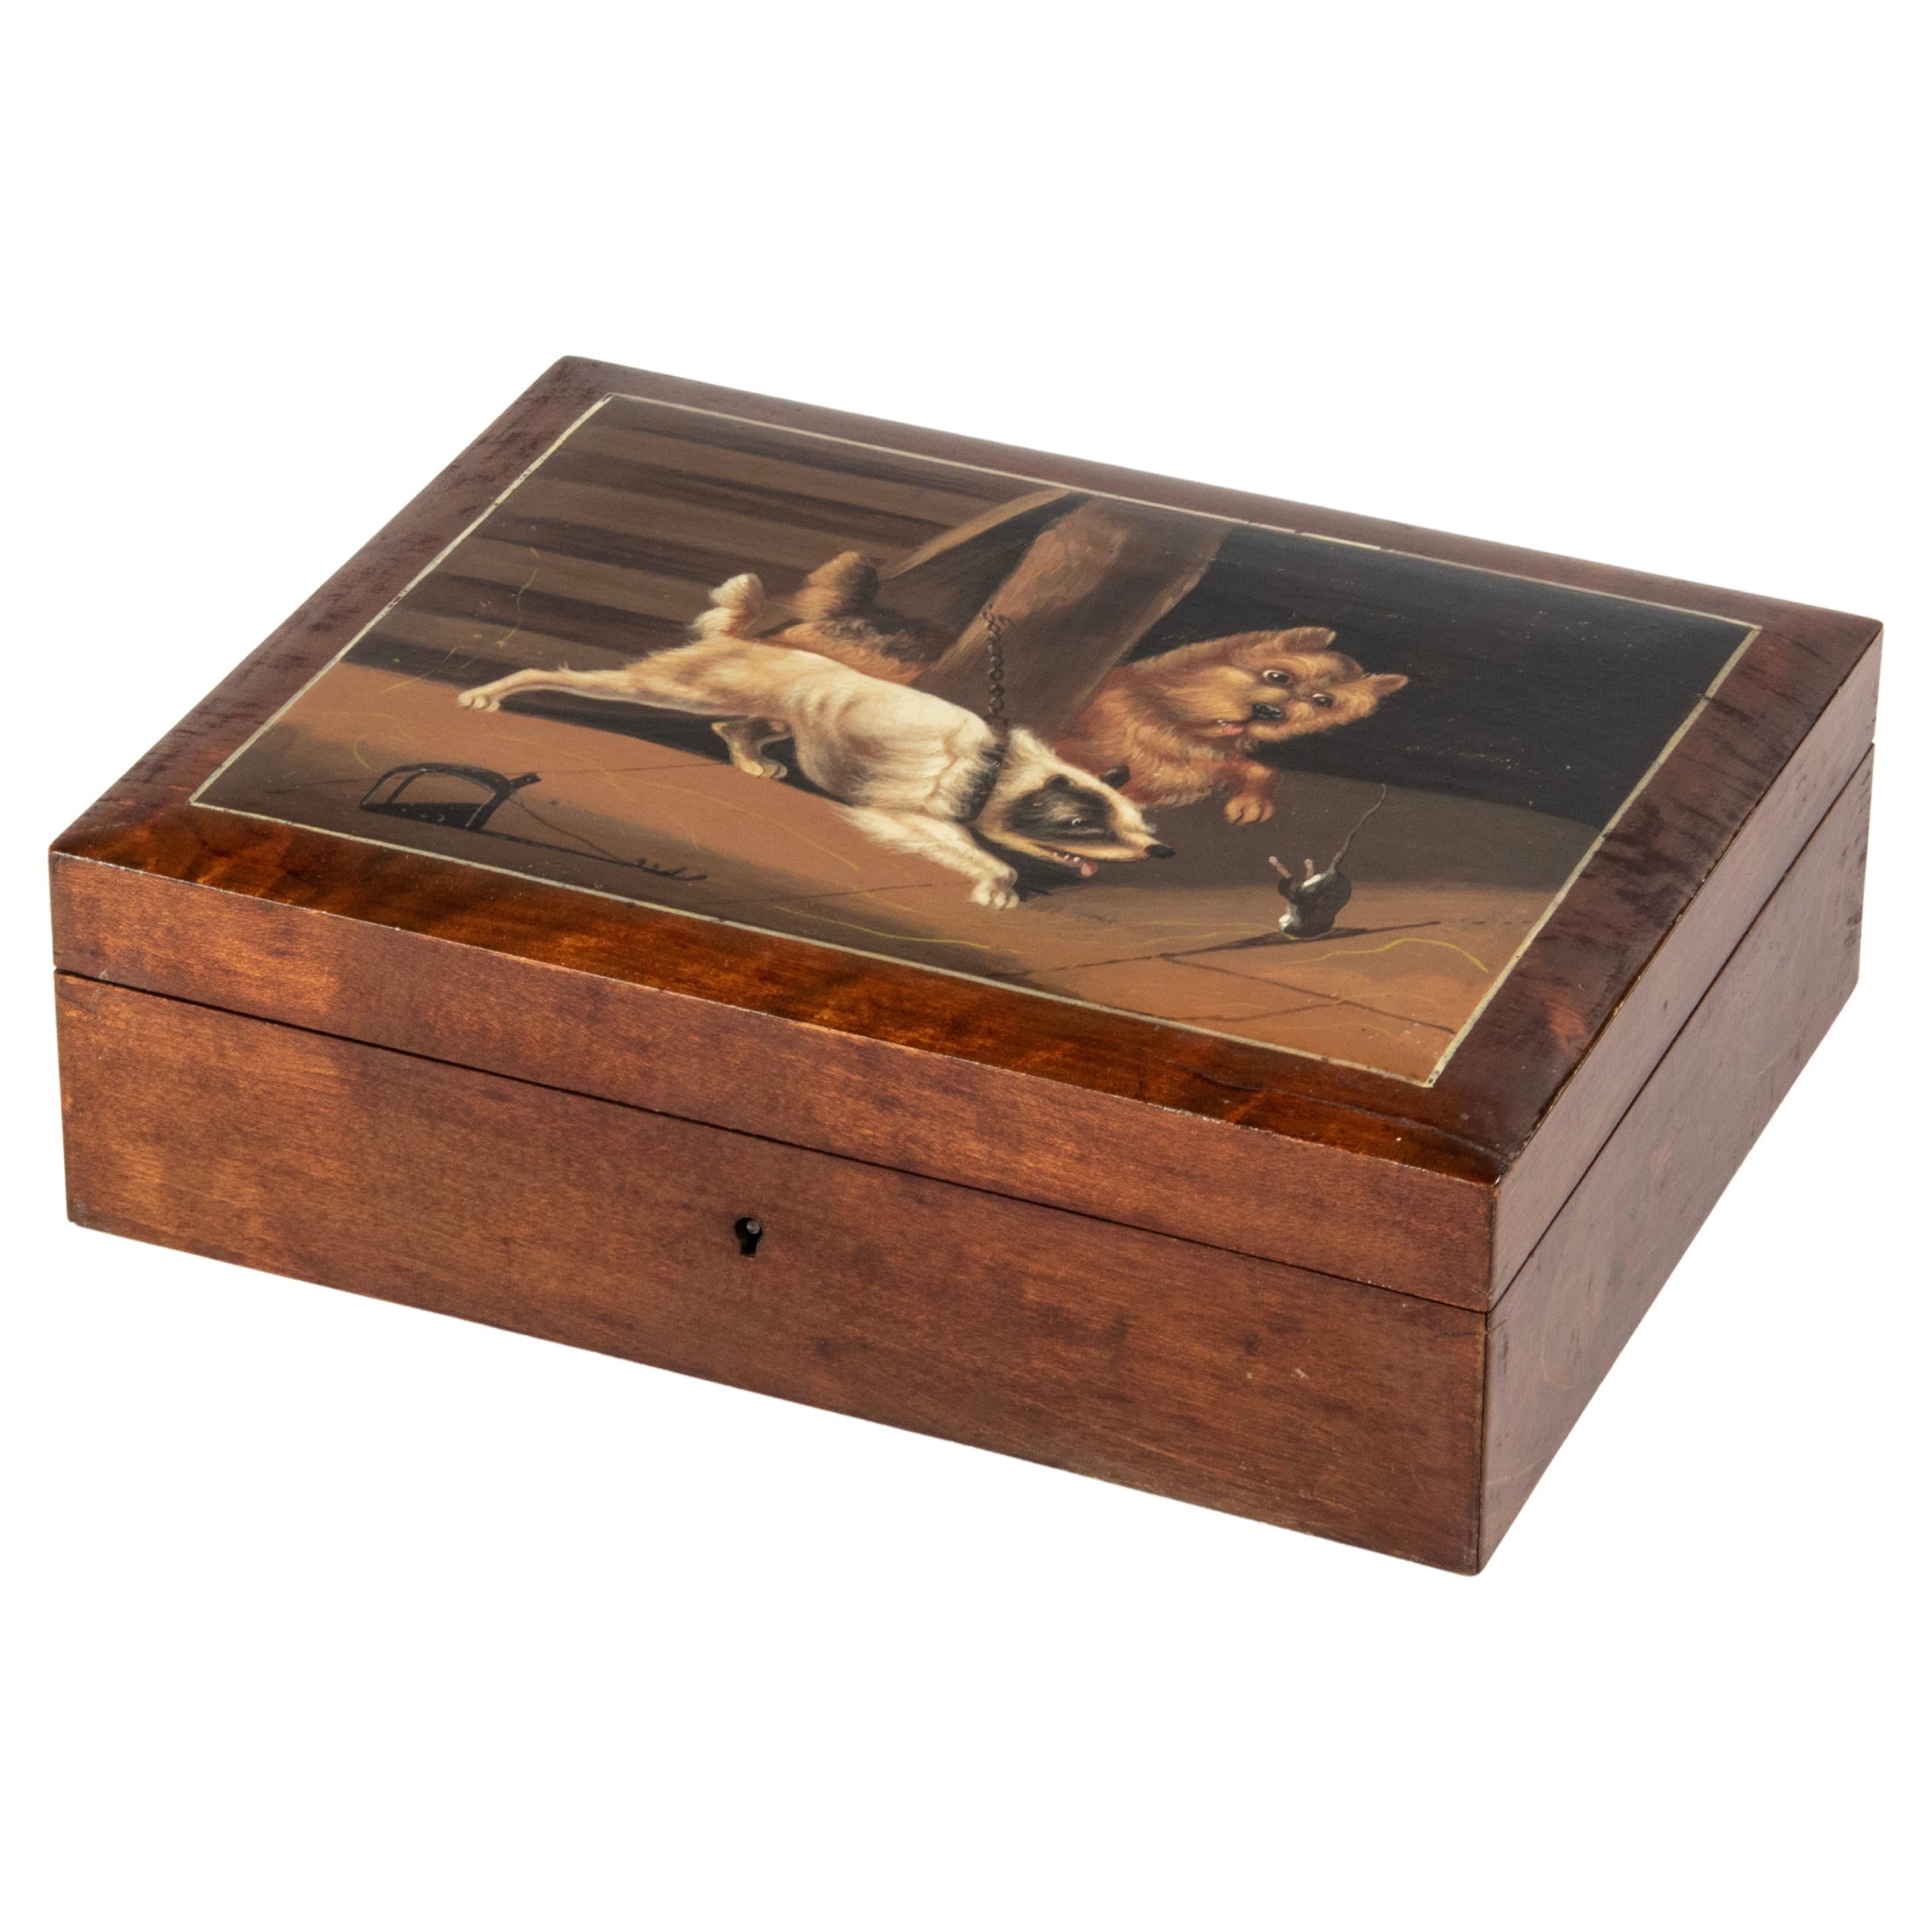 Late 19th Century Decorative Box with Dog Painting Lid For Sale